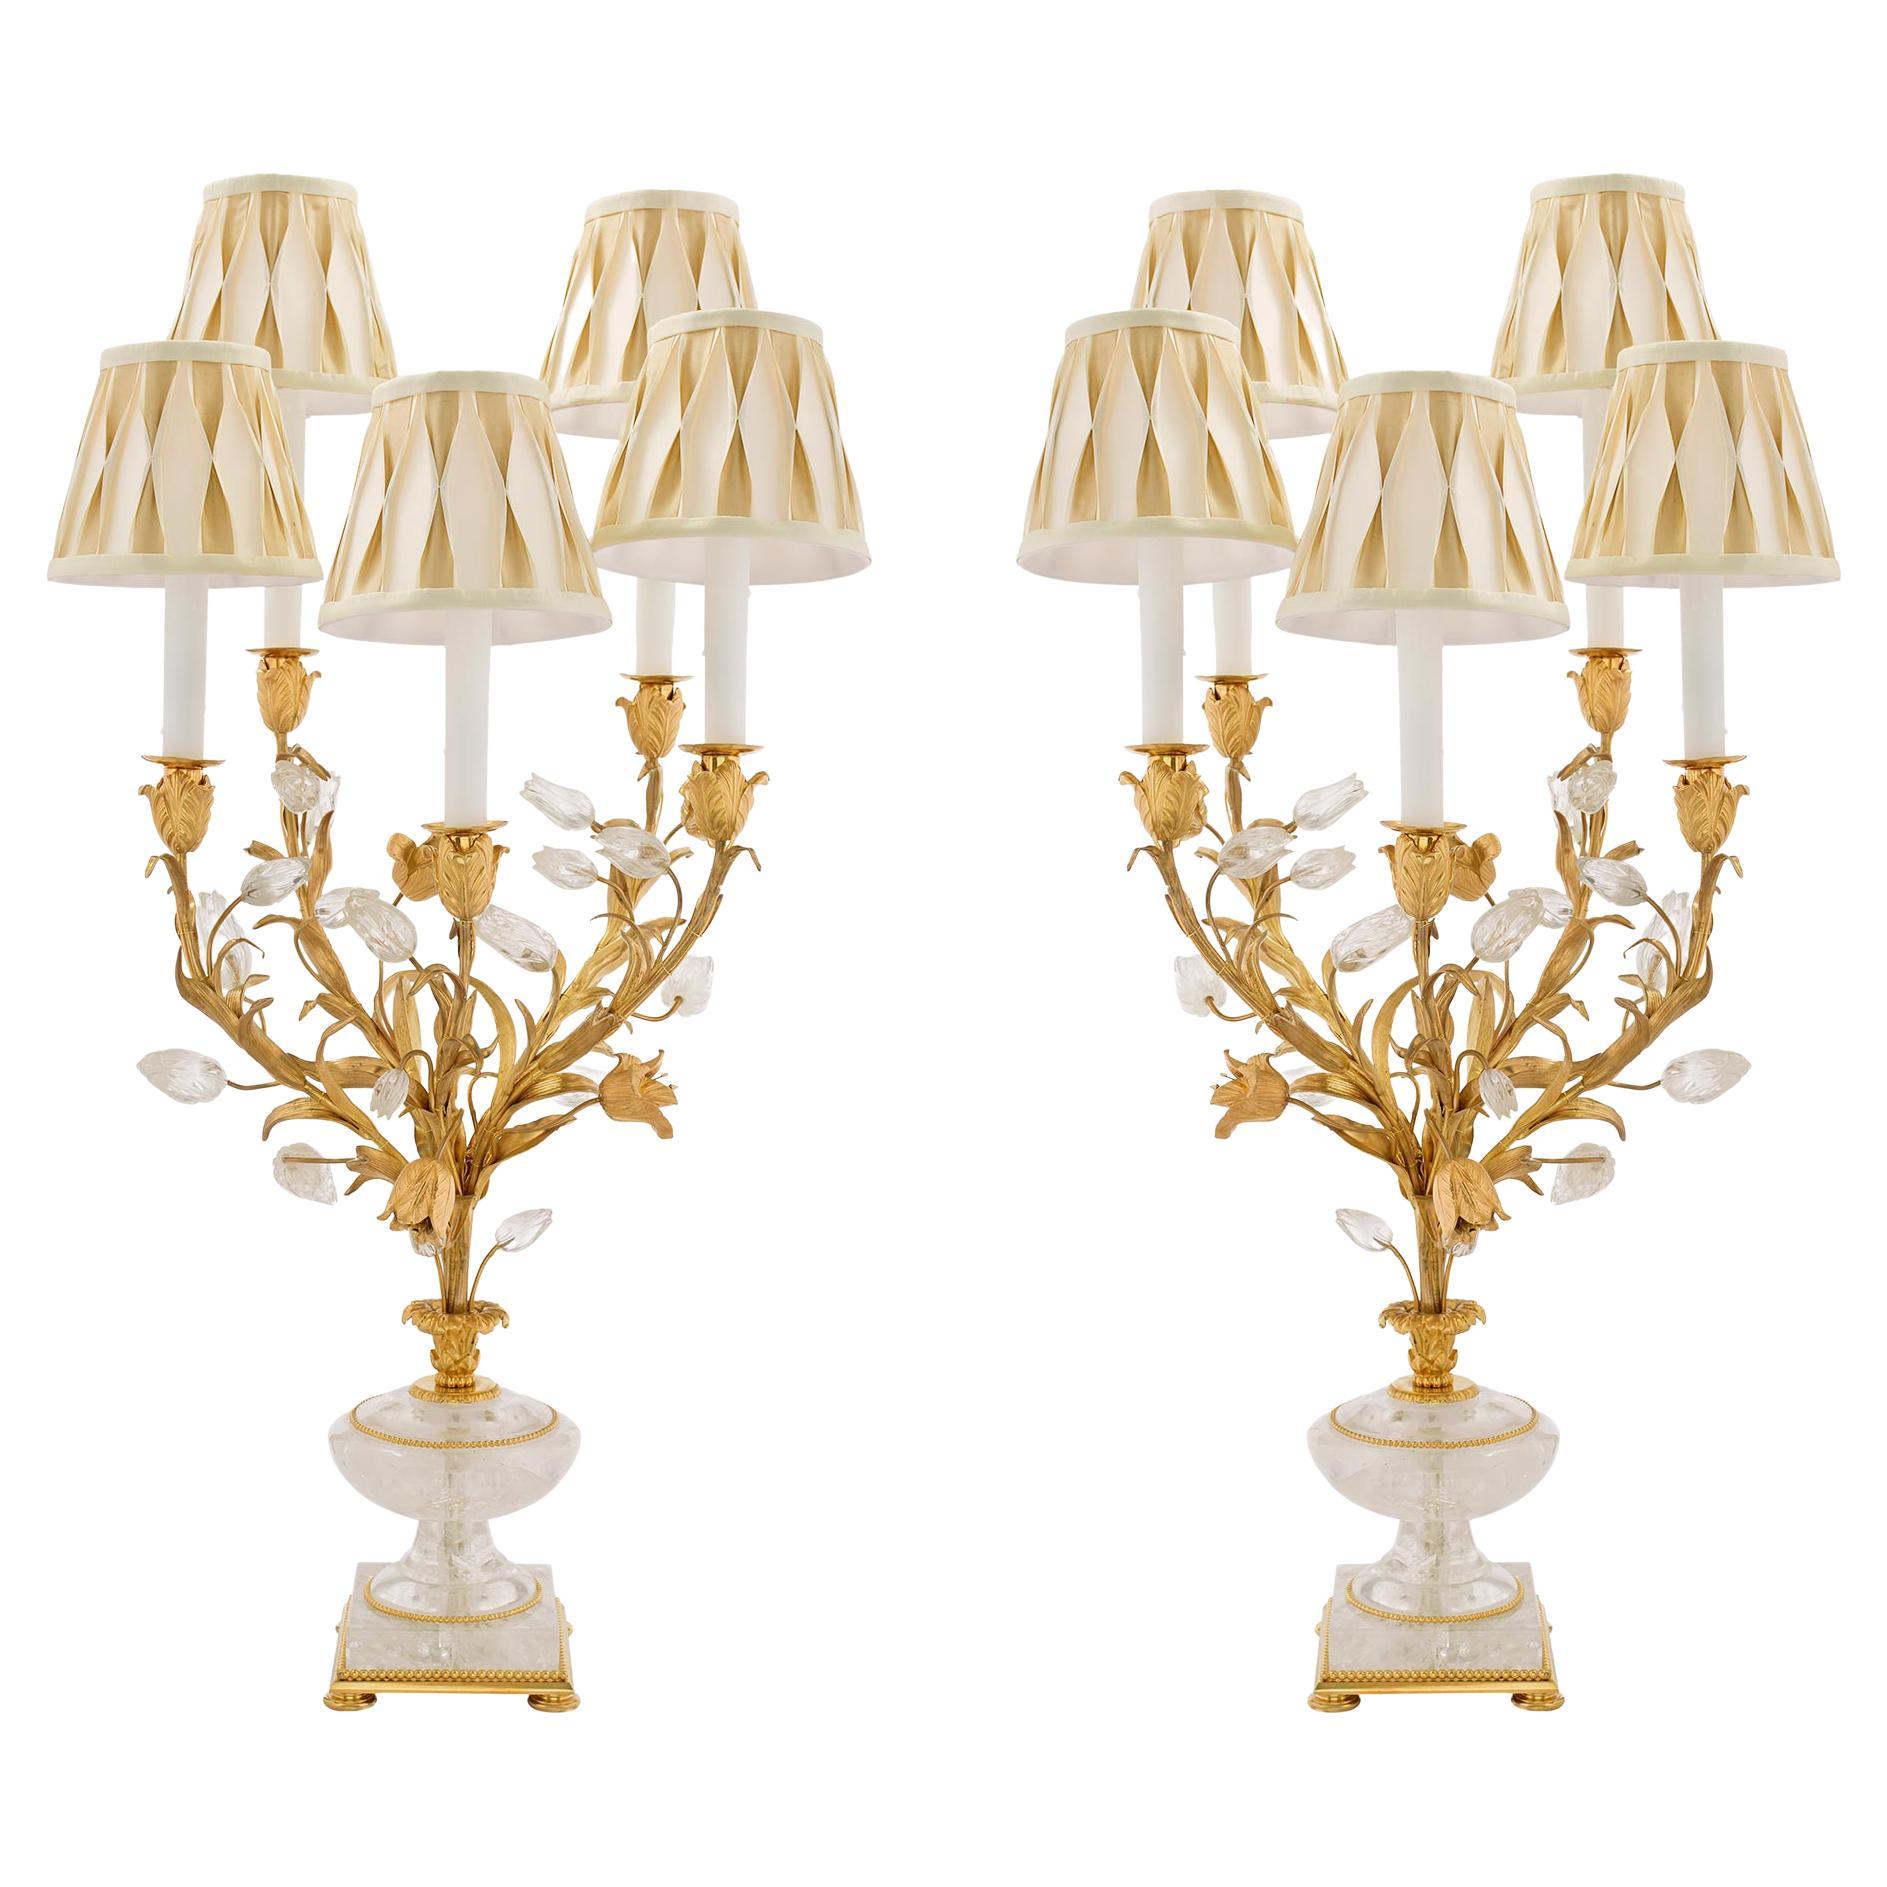 Pair of French Louis XVI St. Rock Crystal and Ormolu Candelabra Lamps